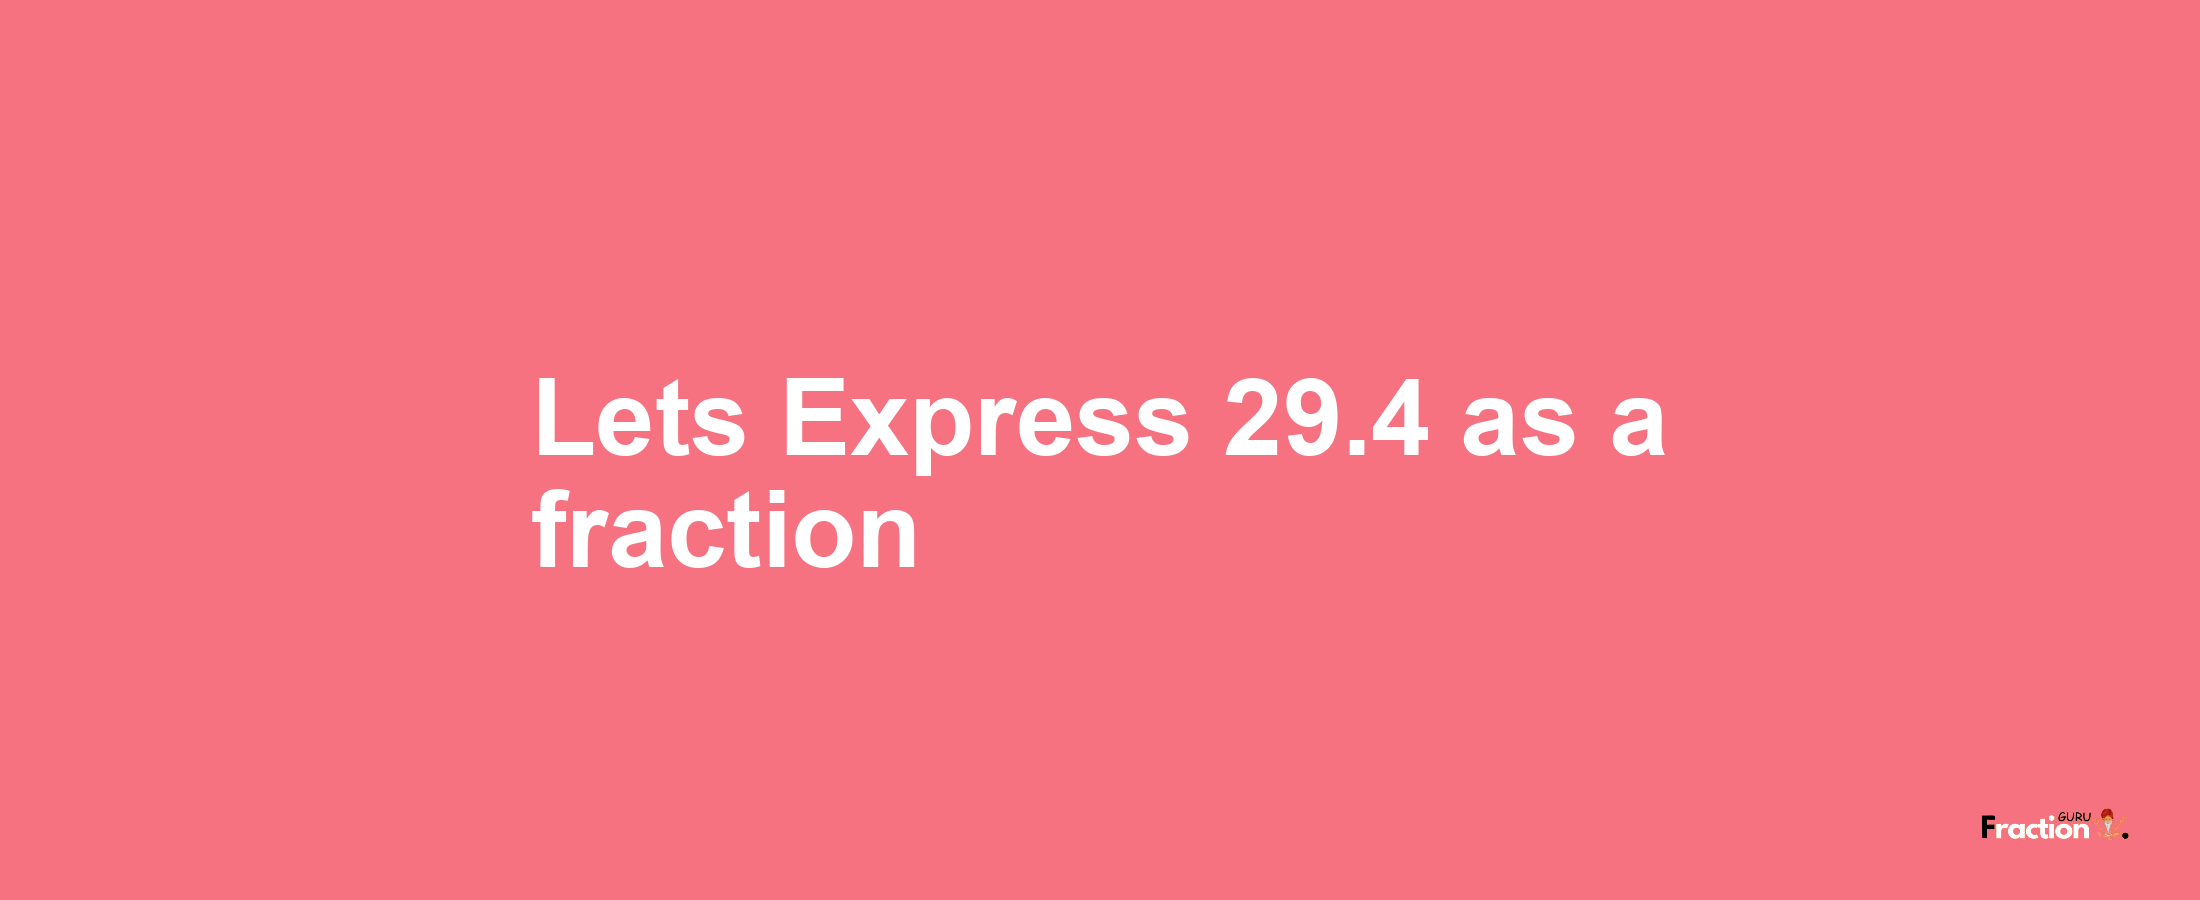 Lets Express 29.4 as afraction